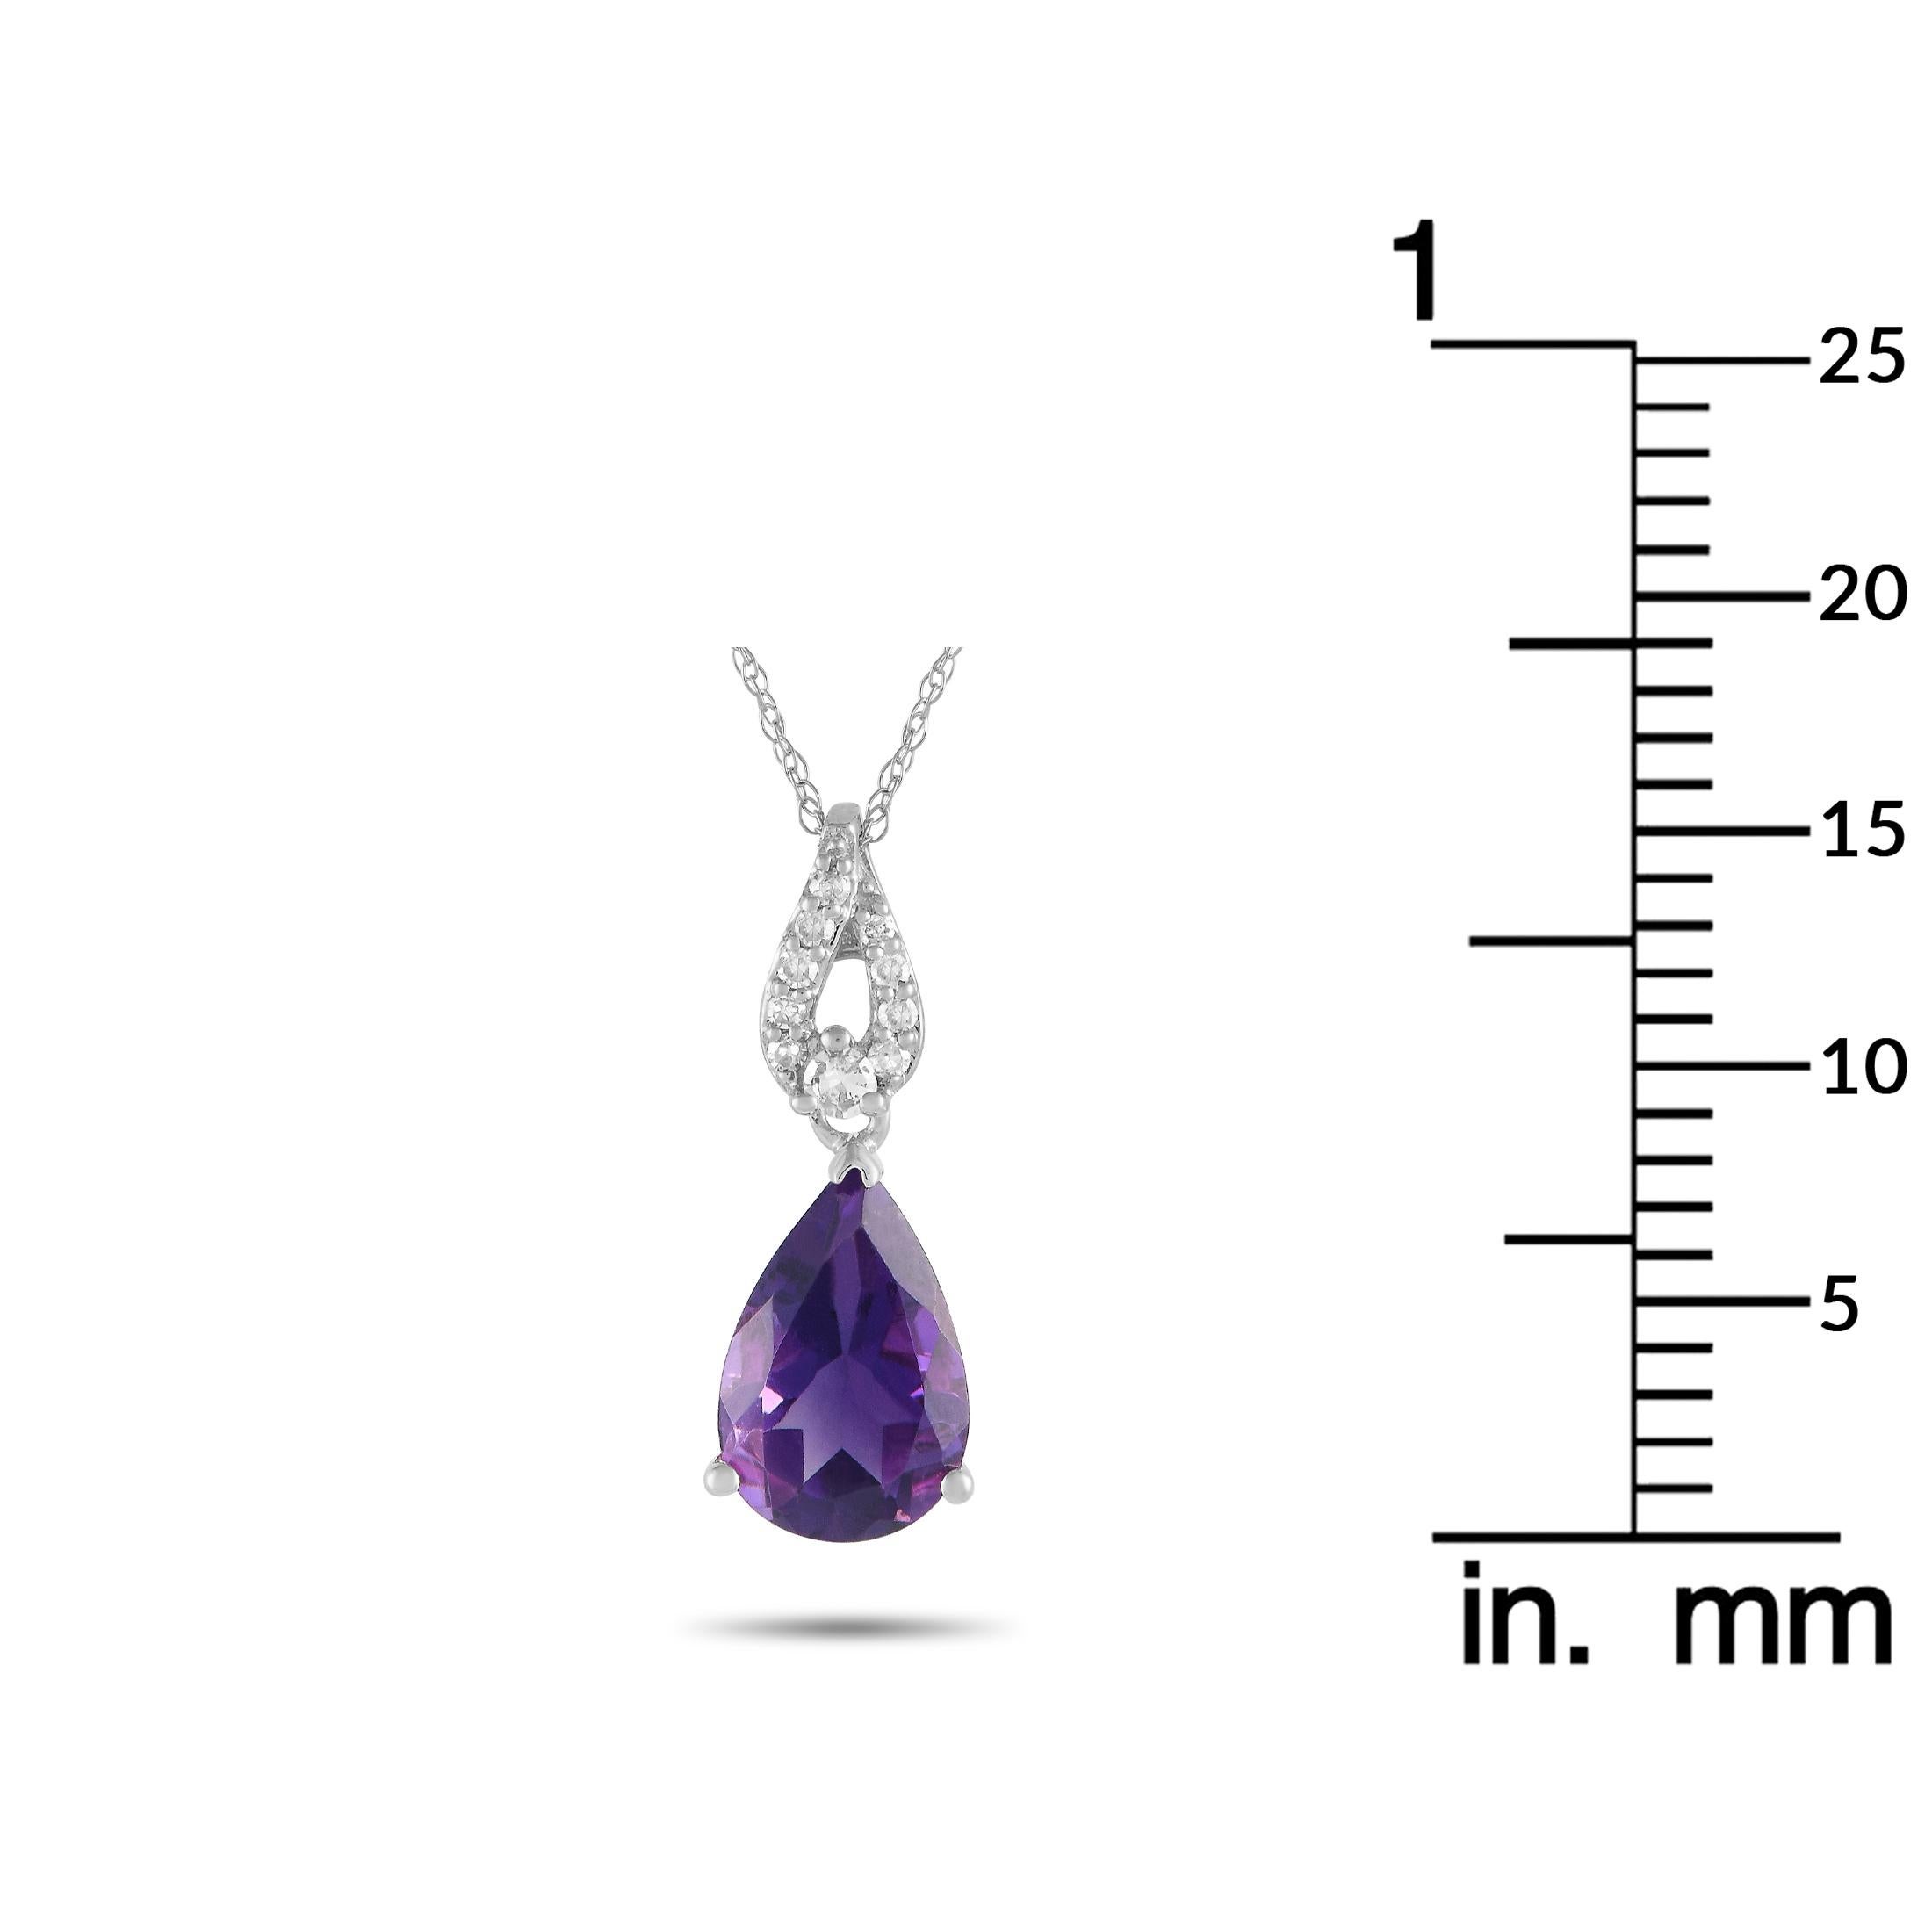 LB Exclusive 14K White Gold 0.06ct Diamond & Amethyst Pear Necklace PD4-16184WAM In New Condition For Sale In Southampton, PA